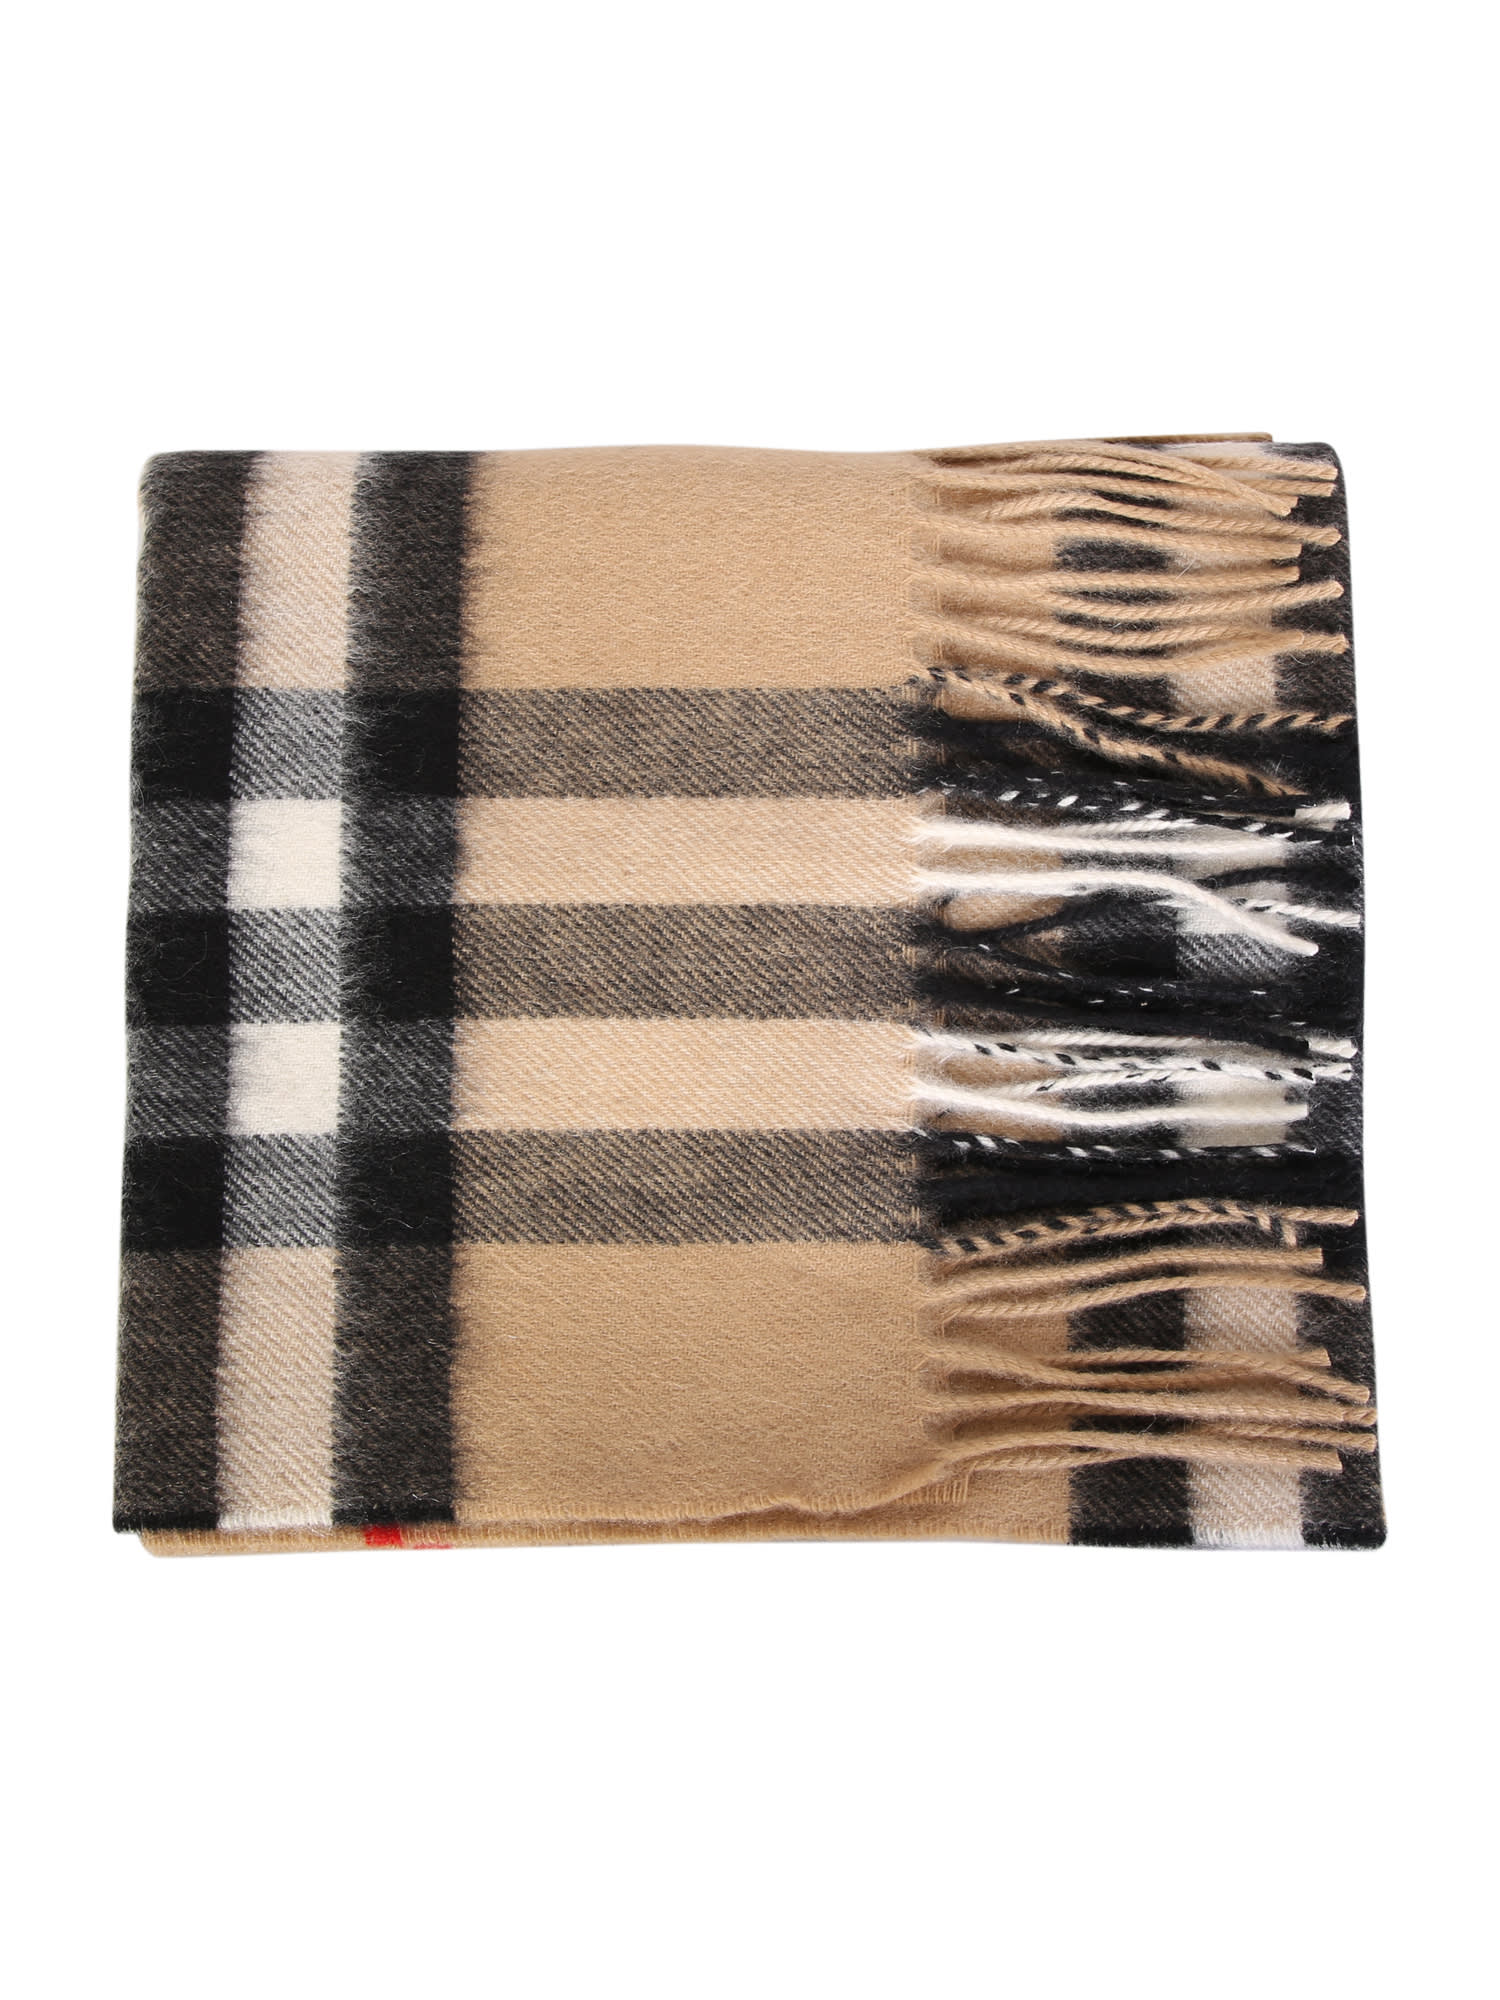 Burberry Cashmere Scarf With Classic Burberry Print. Simple But Essential, It Gives A Casual Touch To The Winter Look